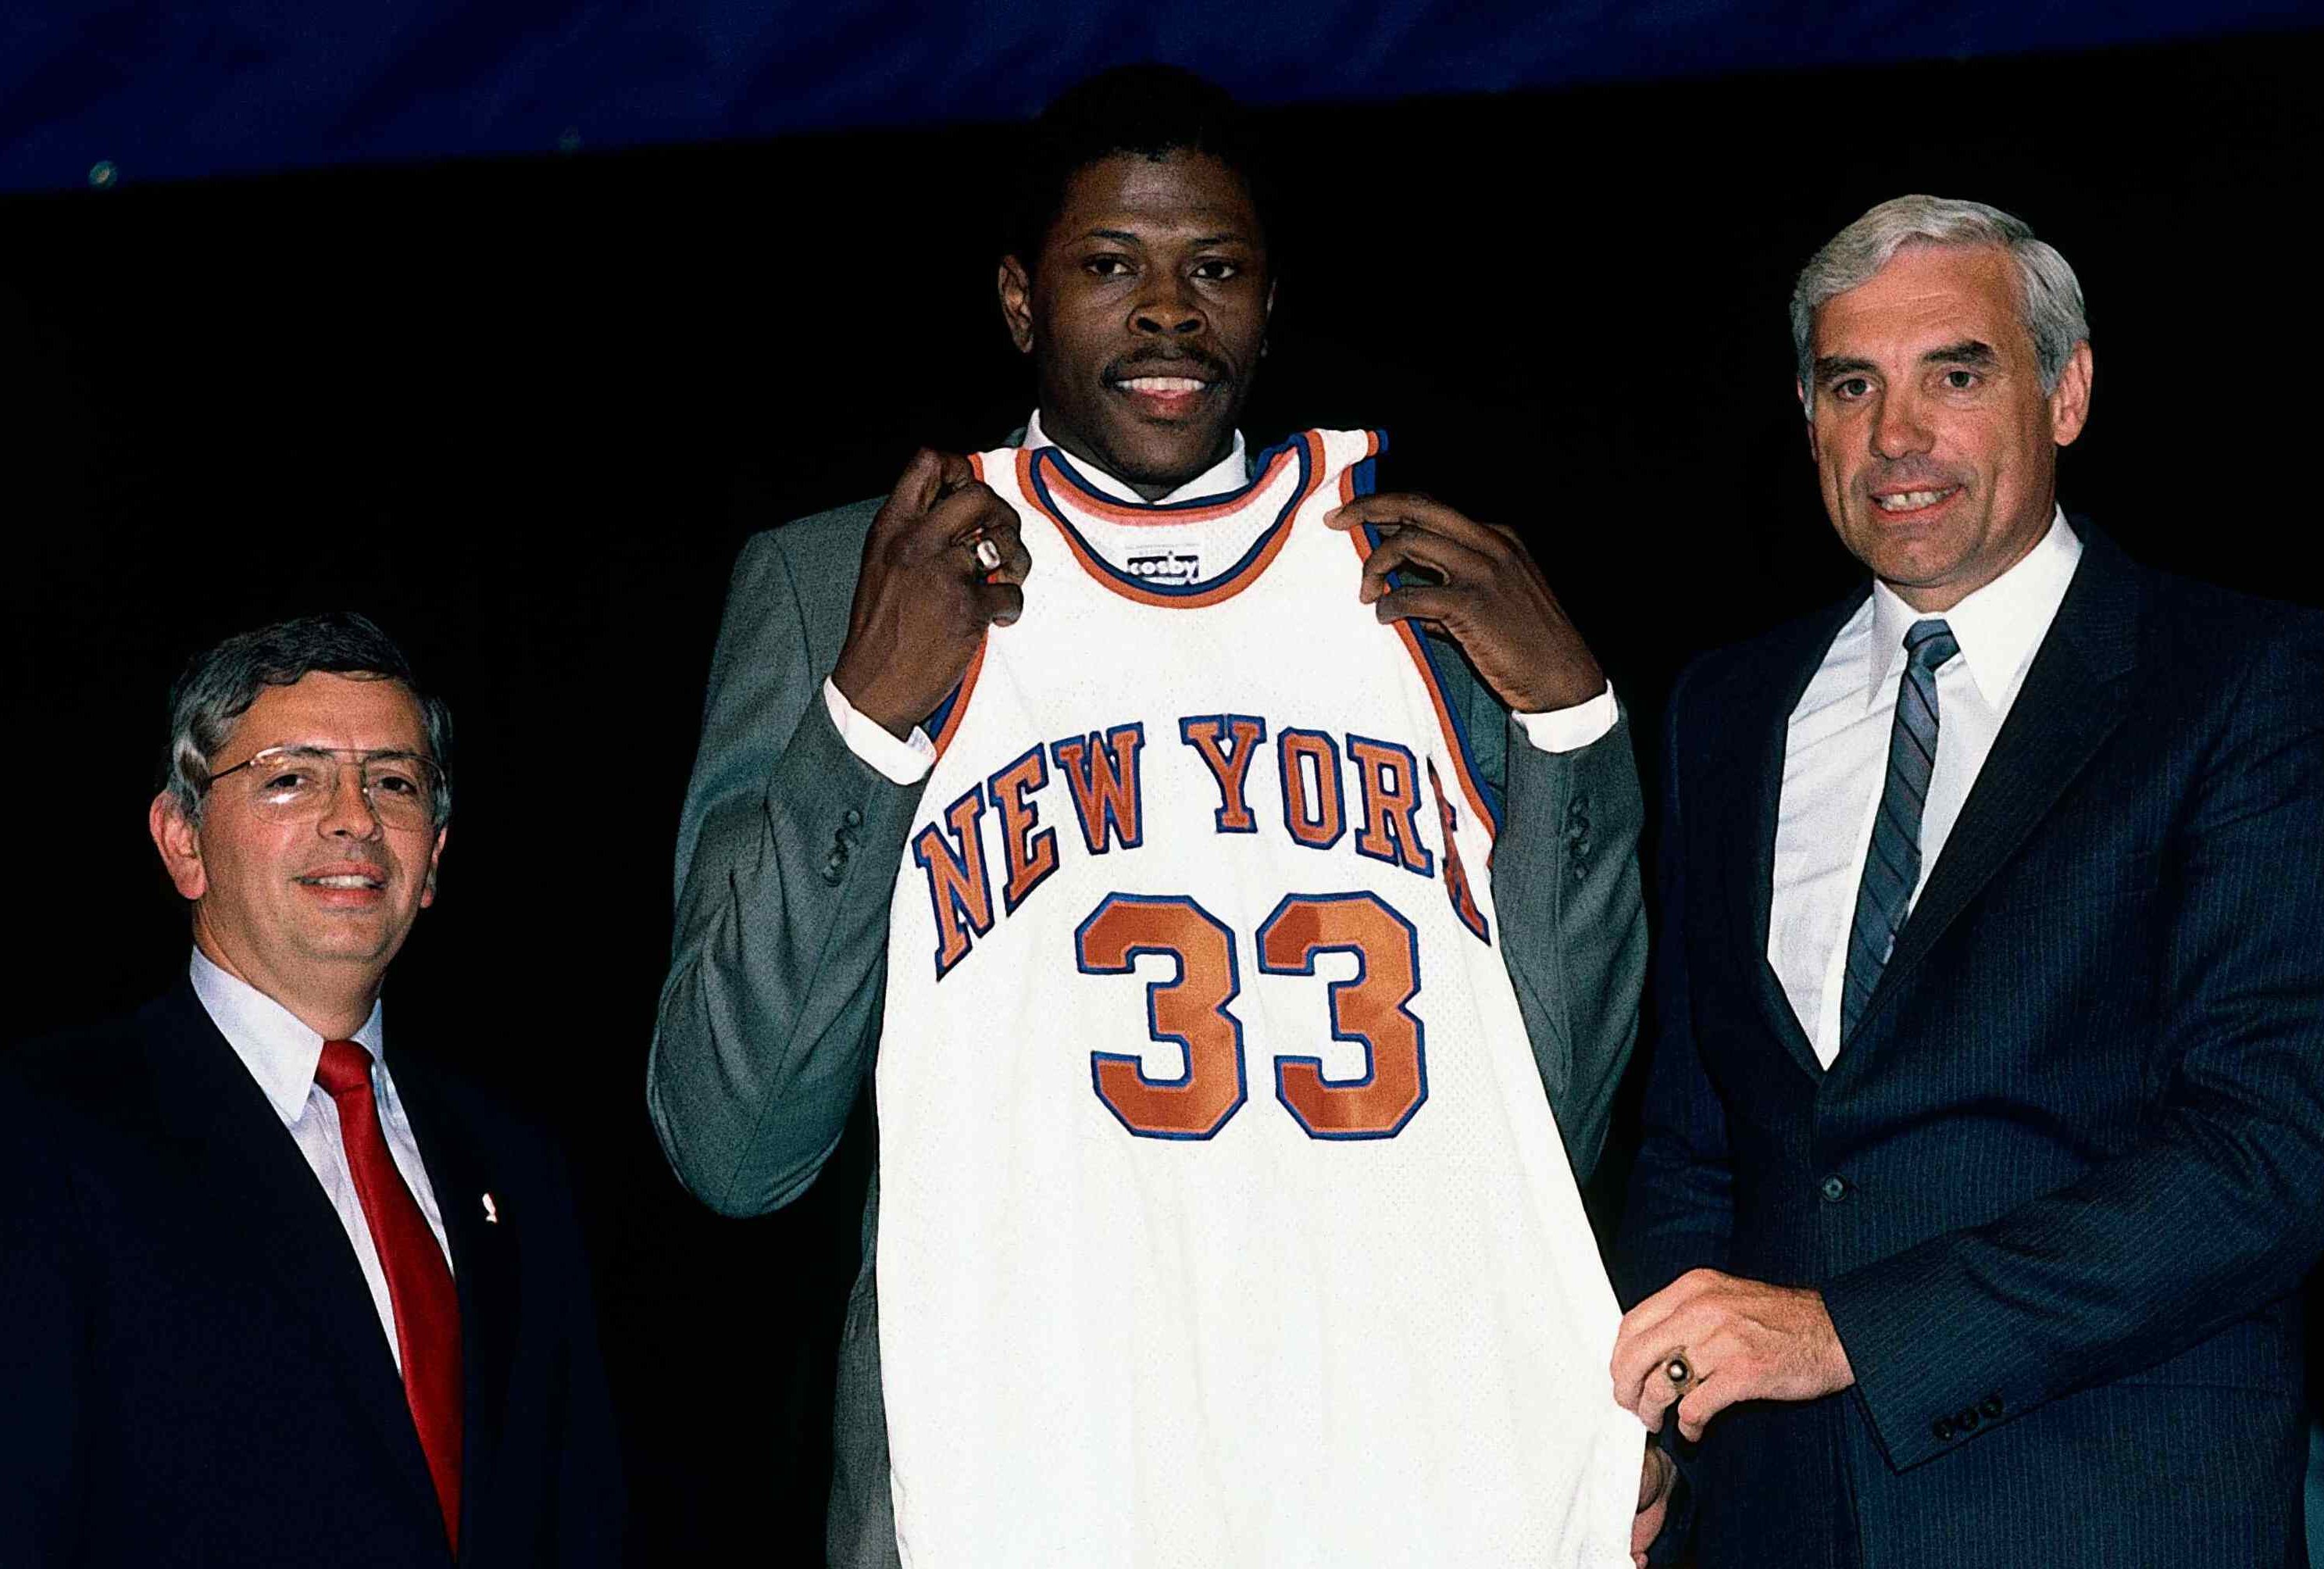 The Most Points Scored By NBA Draft Classes: The 1985 Draft Class